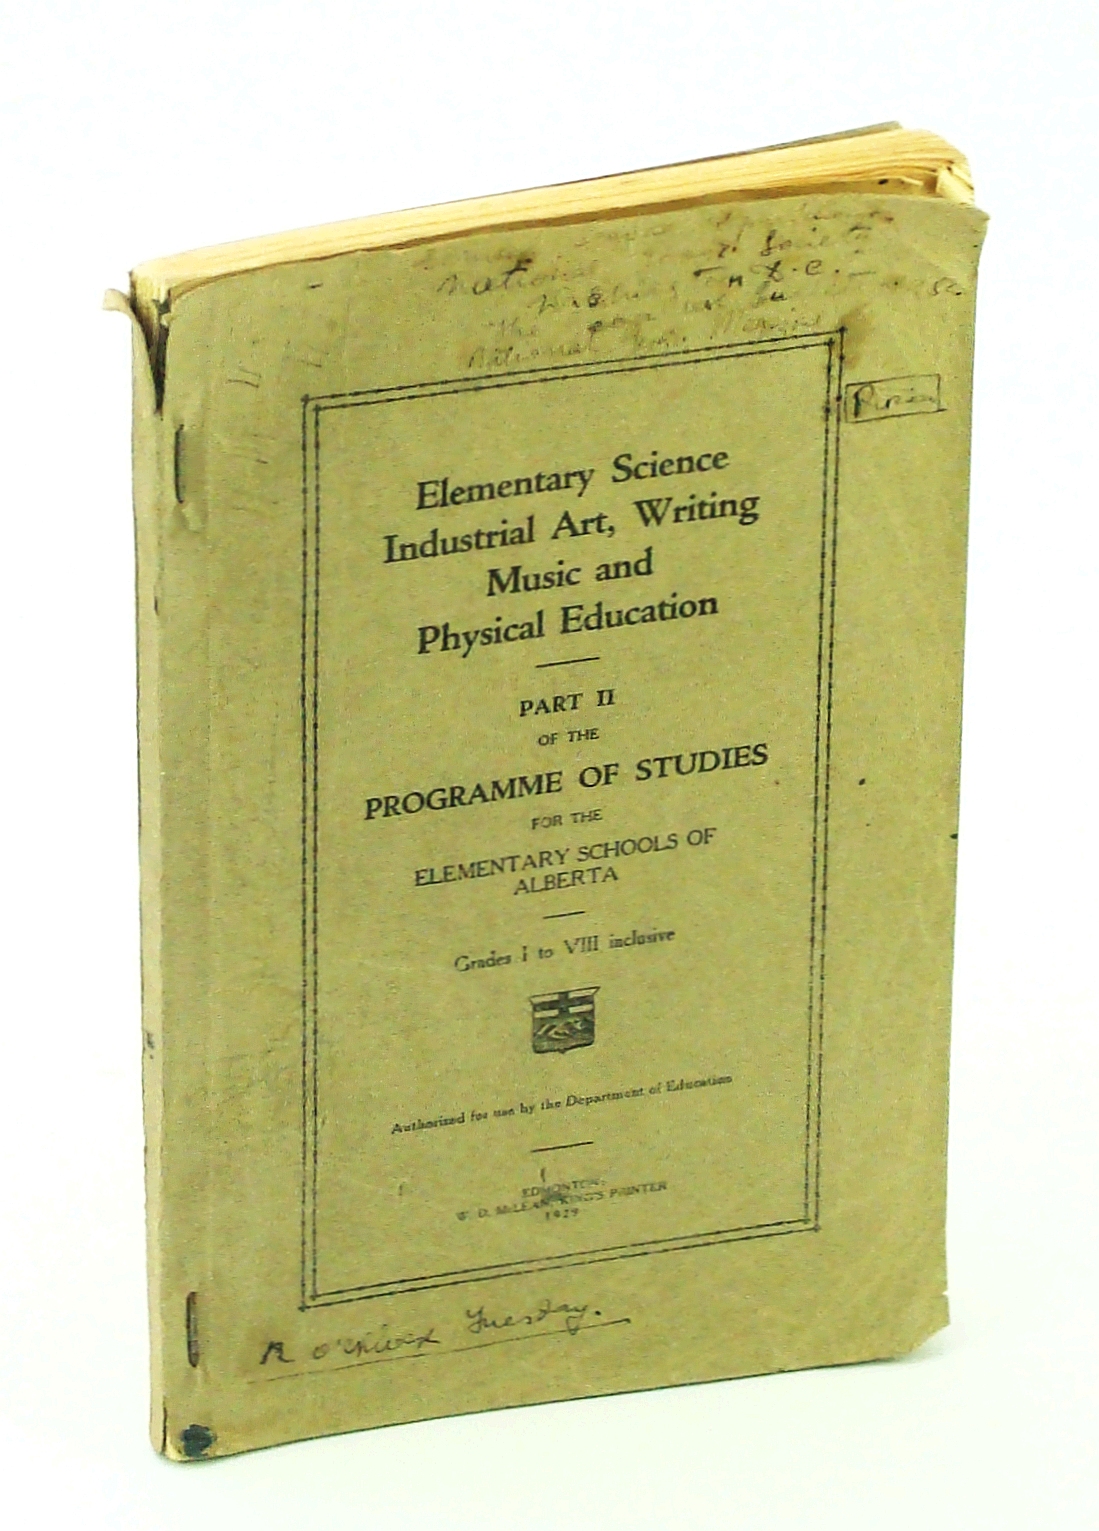 Image for Elementary Science, Industrial Art, Writing, Music and Physical Education: Part II of the Programme of Studies for the Elementary Schools of Alberta, Grades I to VIII Inclusive Authorized for use by the Alberta Department of Education